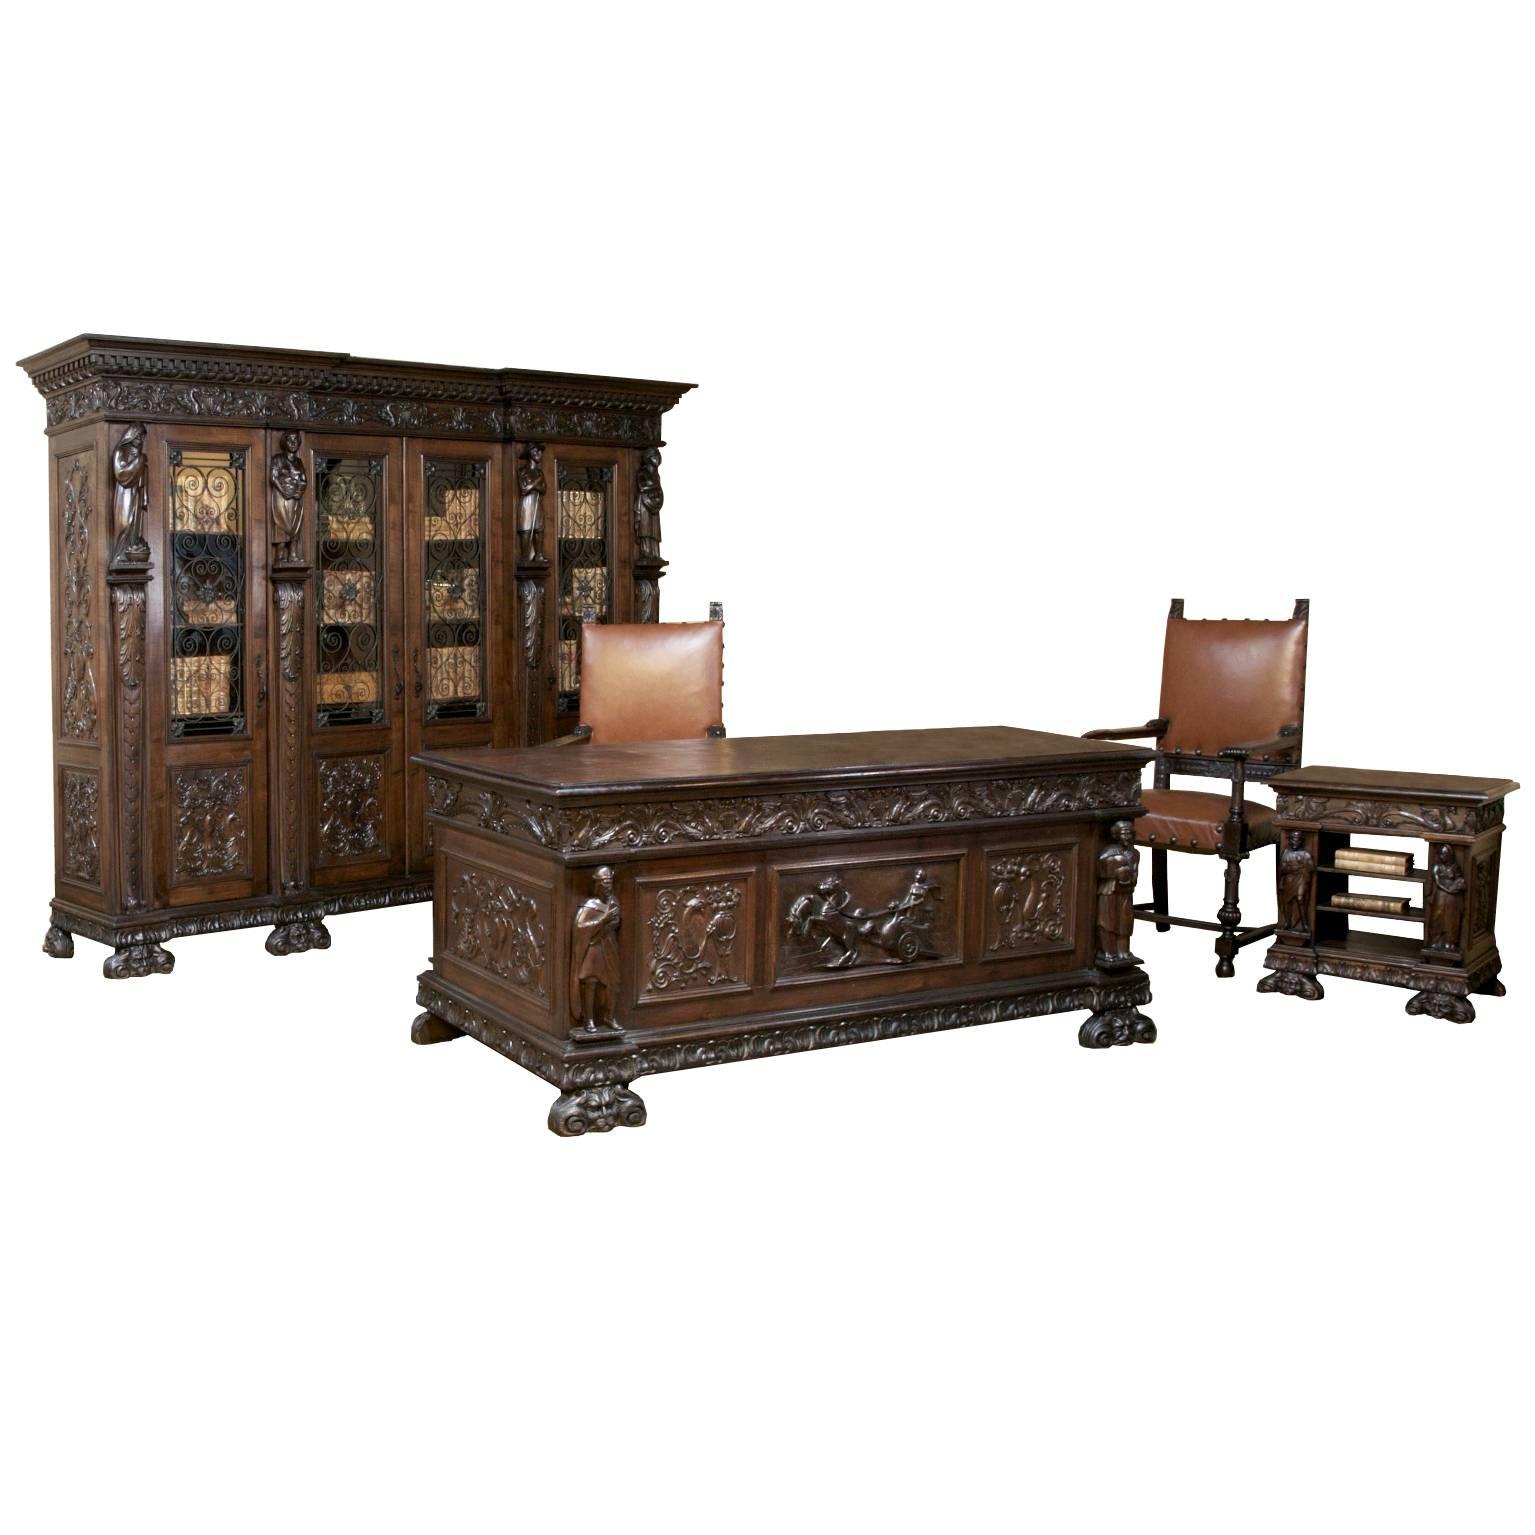 Stunning One-of-a-Kind Grand Italian Renaissance Office Suite in Walnut